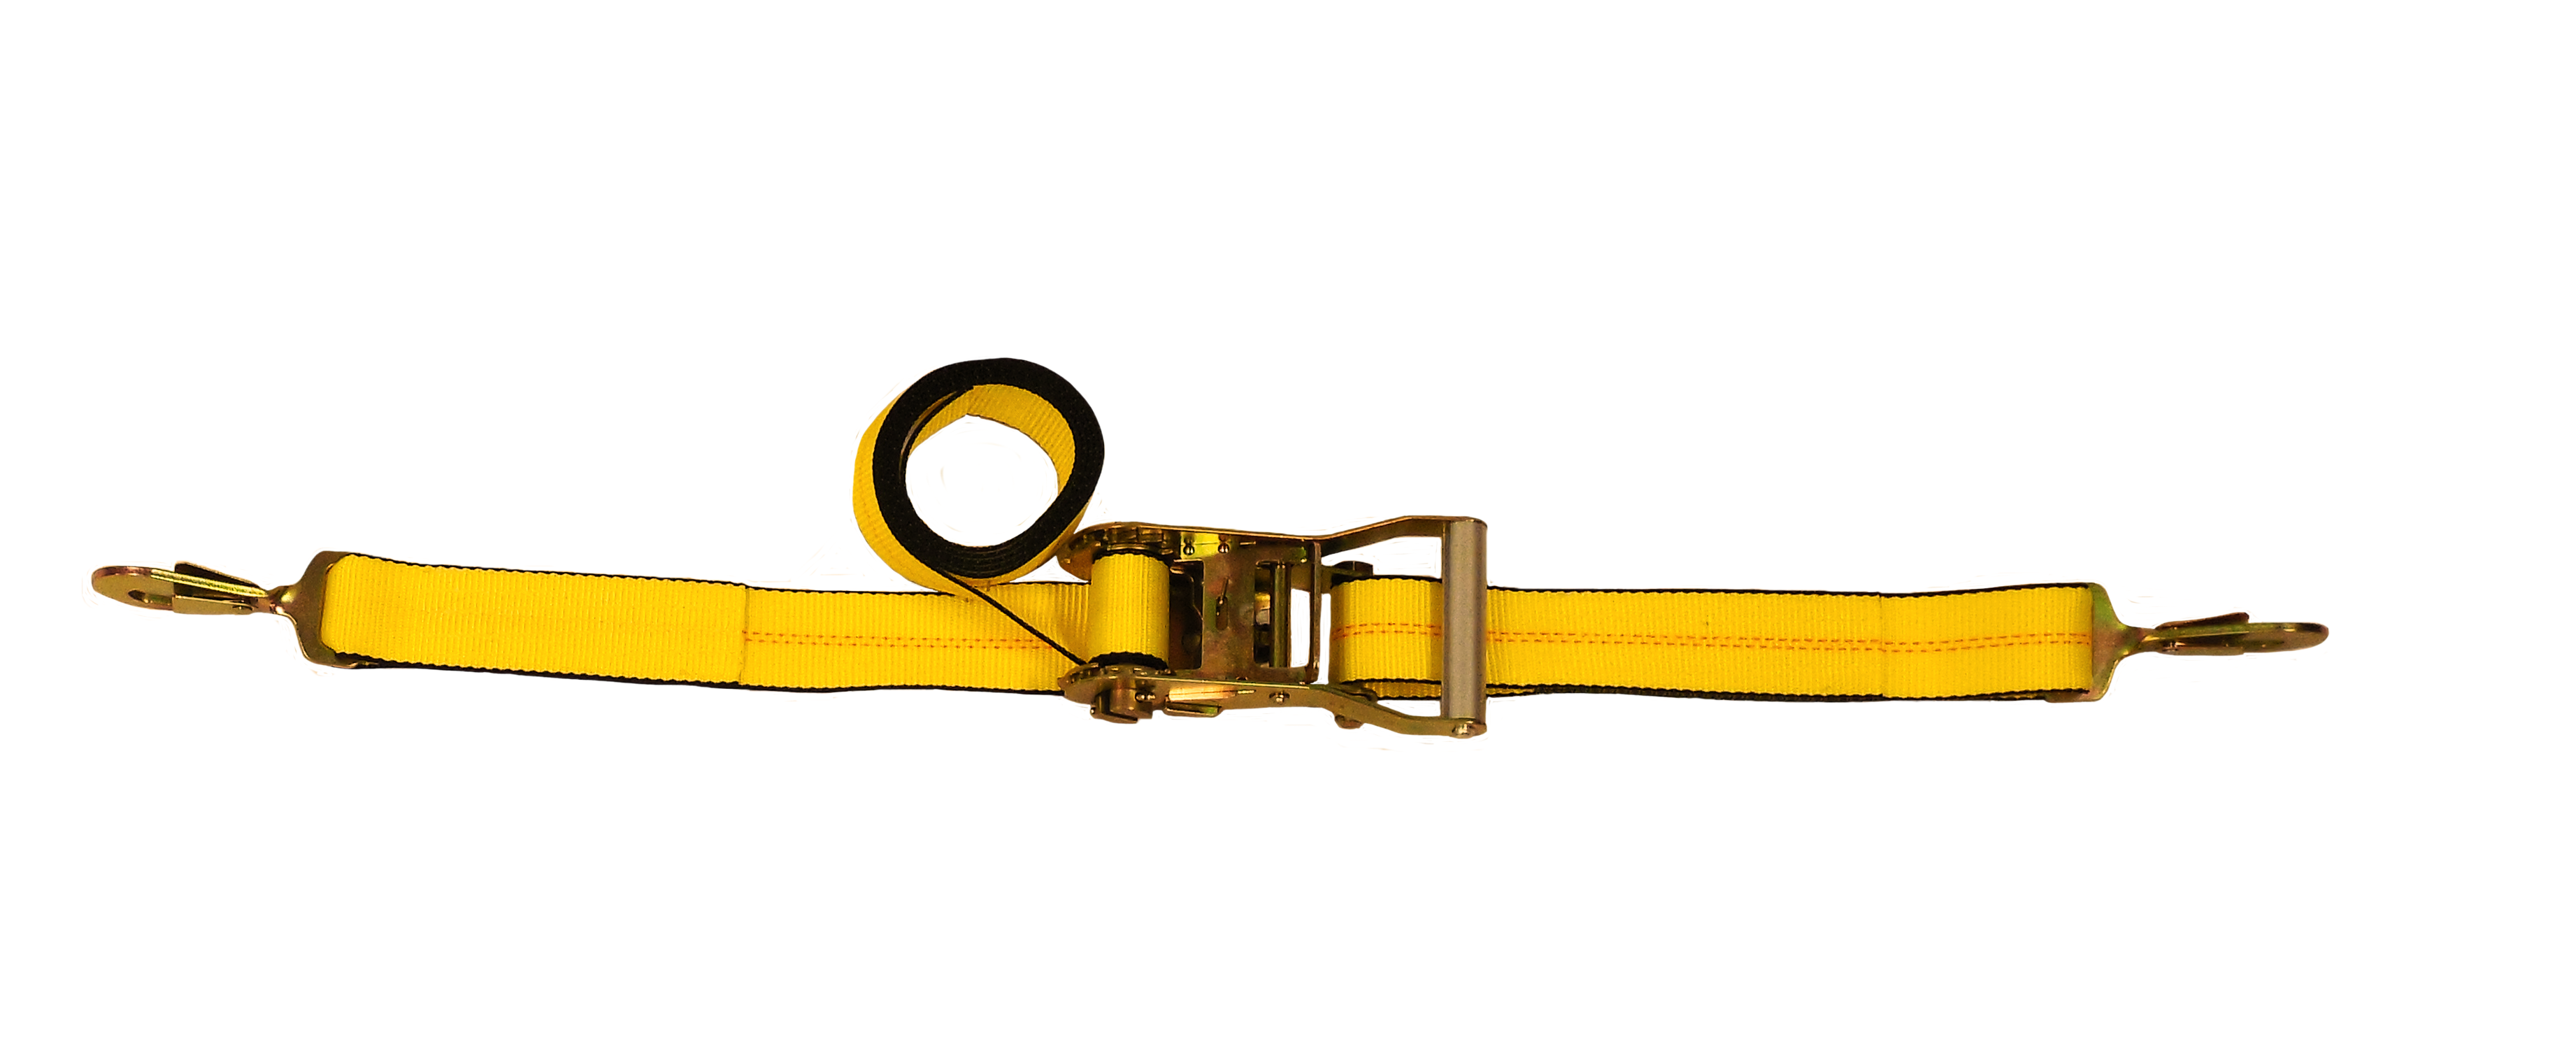 2 x 8' Ratchet Strap with Twisted Snap Hooks